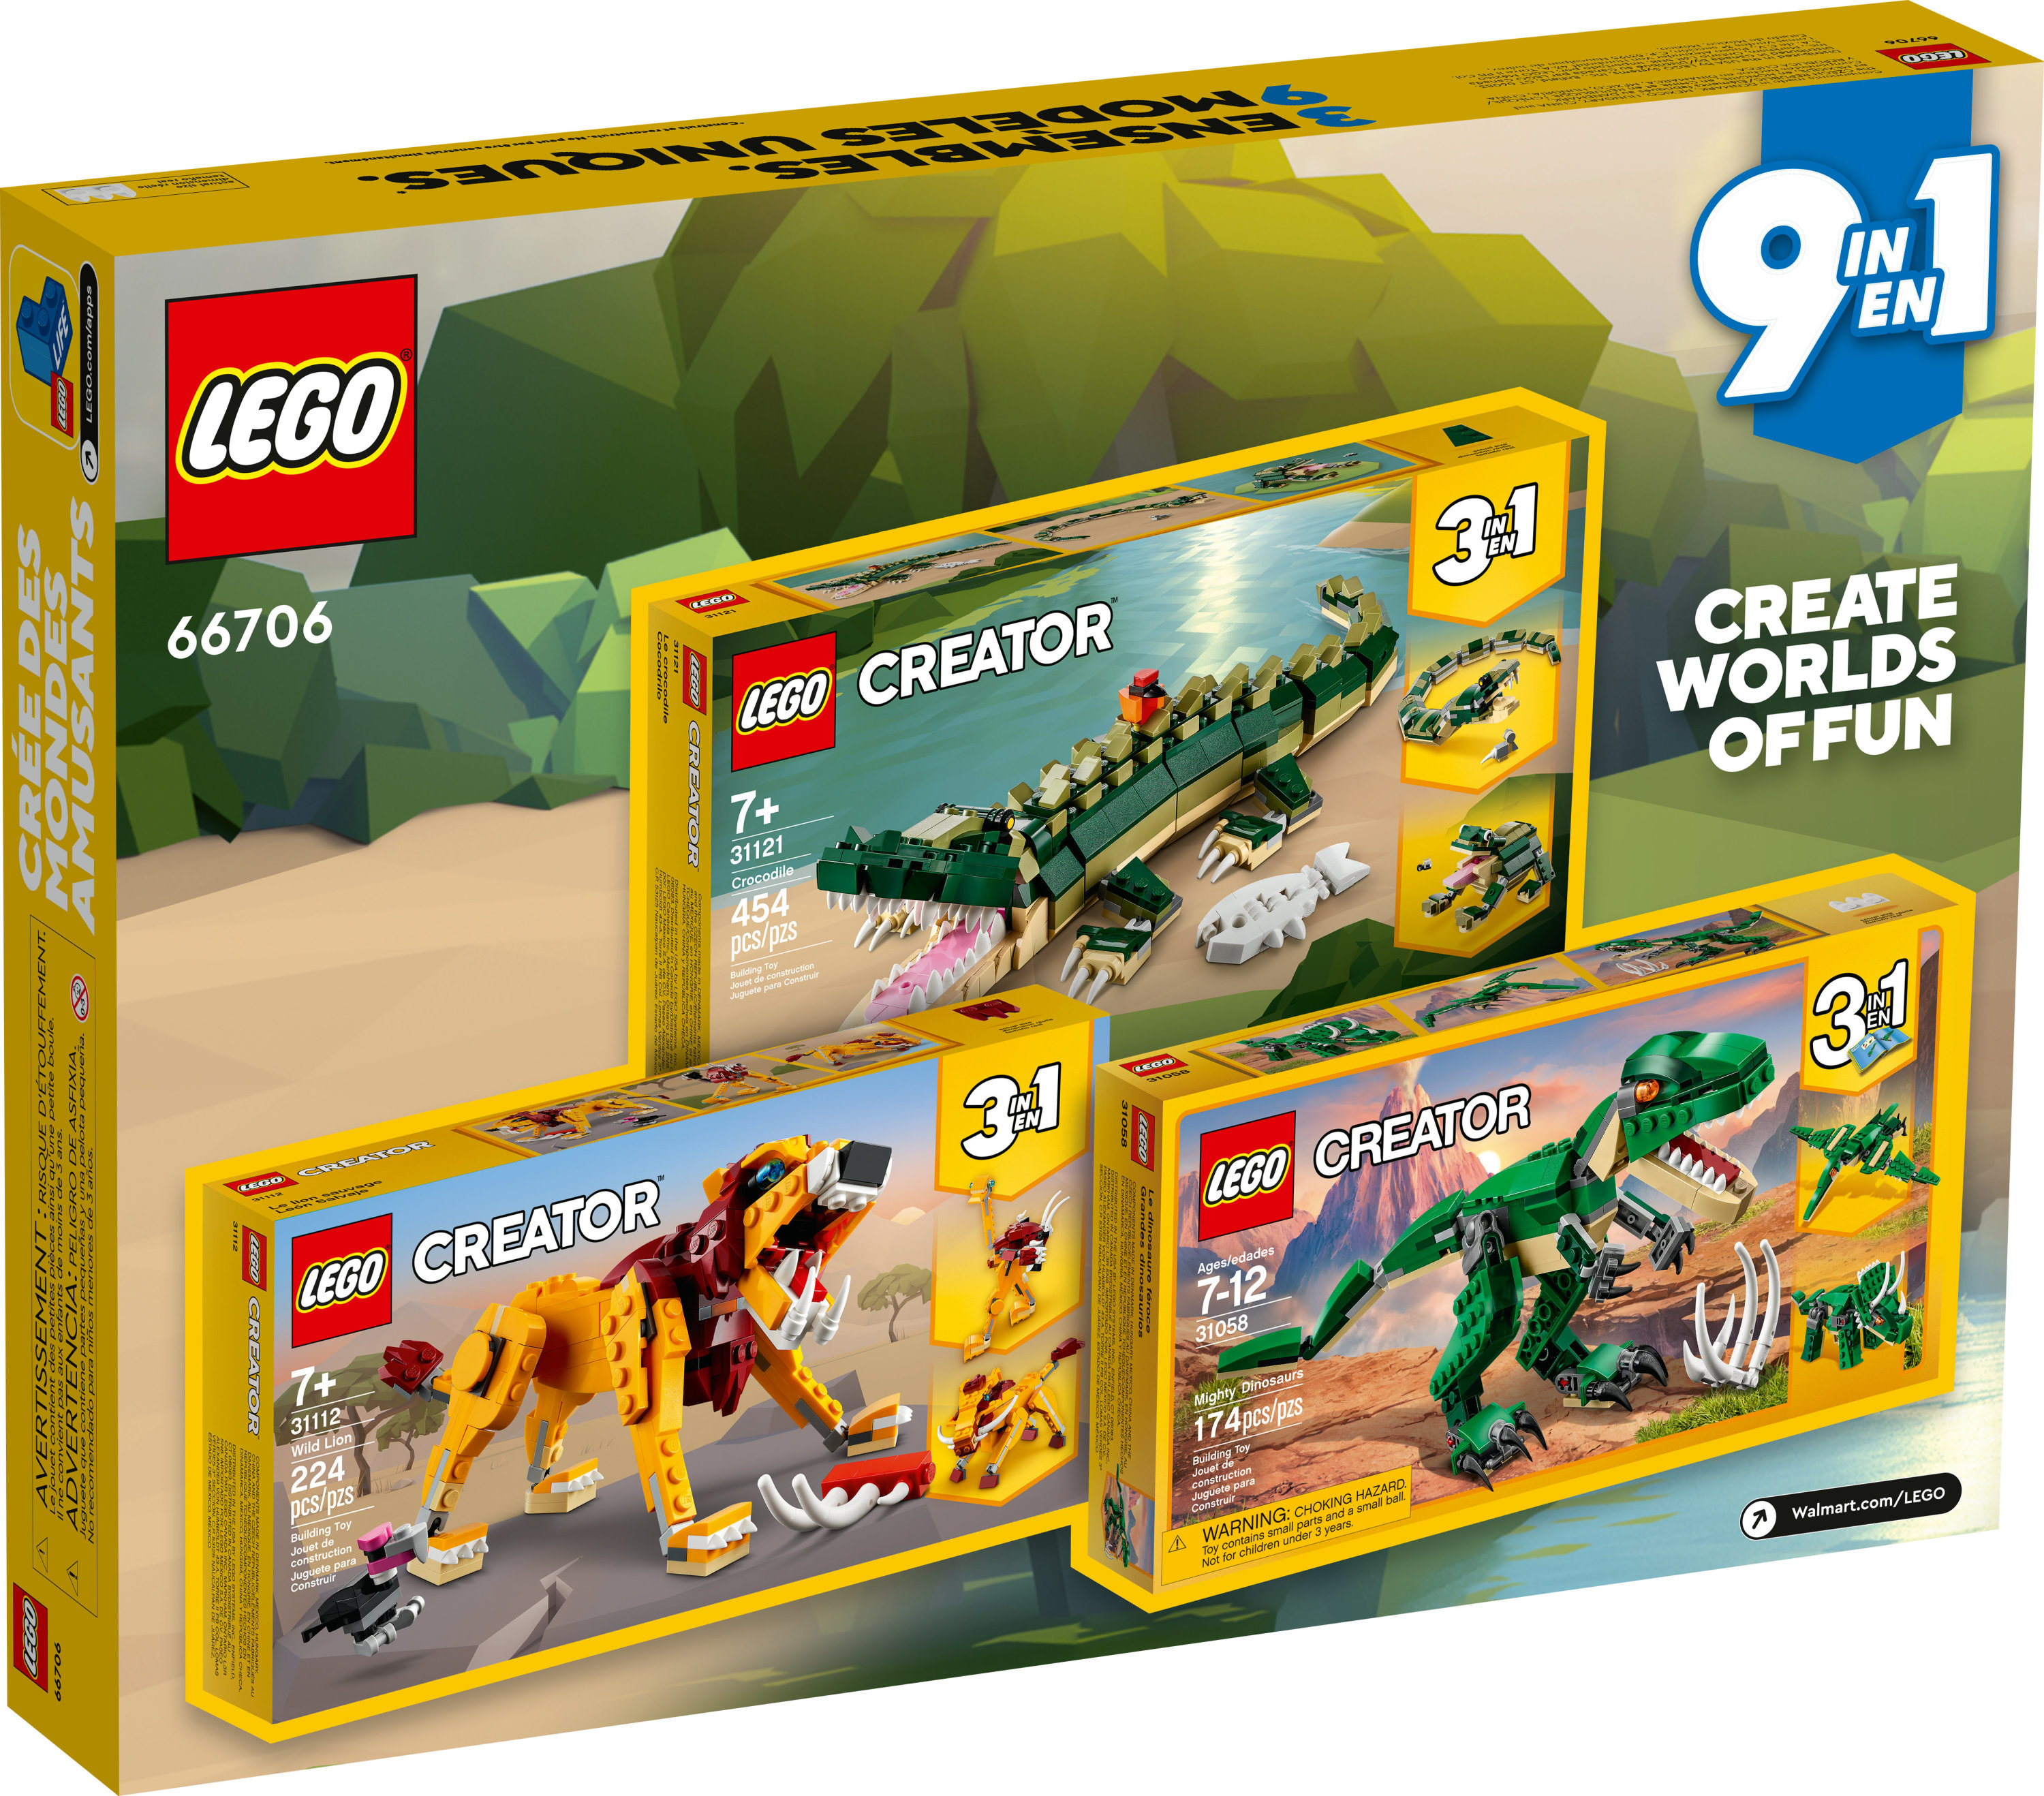 LEGO Creator Animals Bundle Walmart Exclusive includes 3 different 3in1 builds 66706 - image 5 of 7